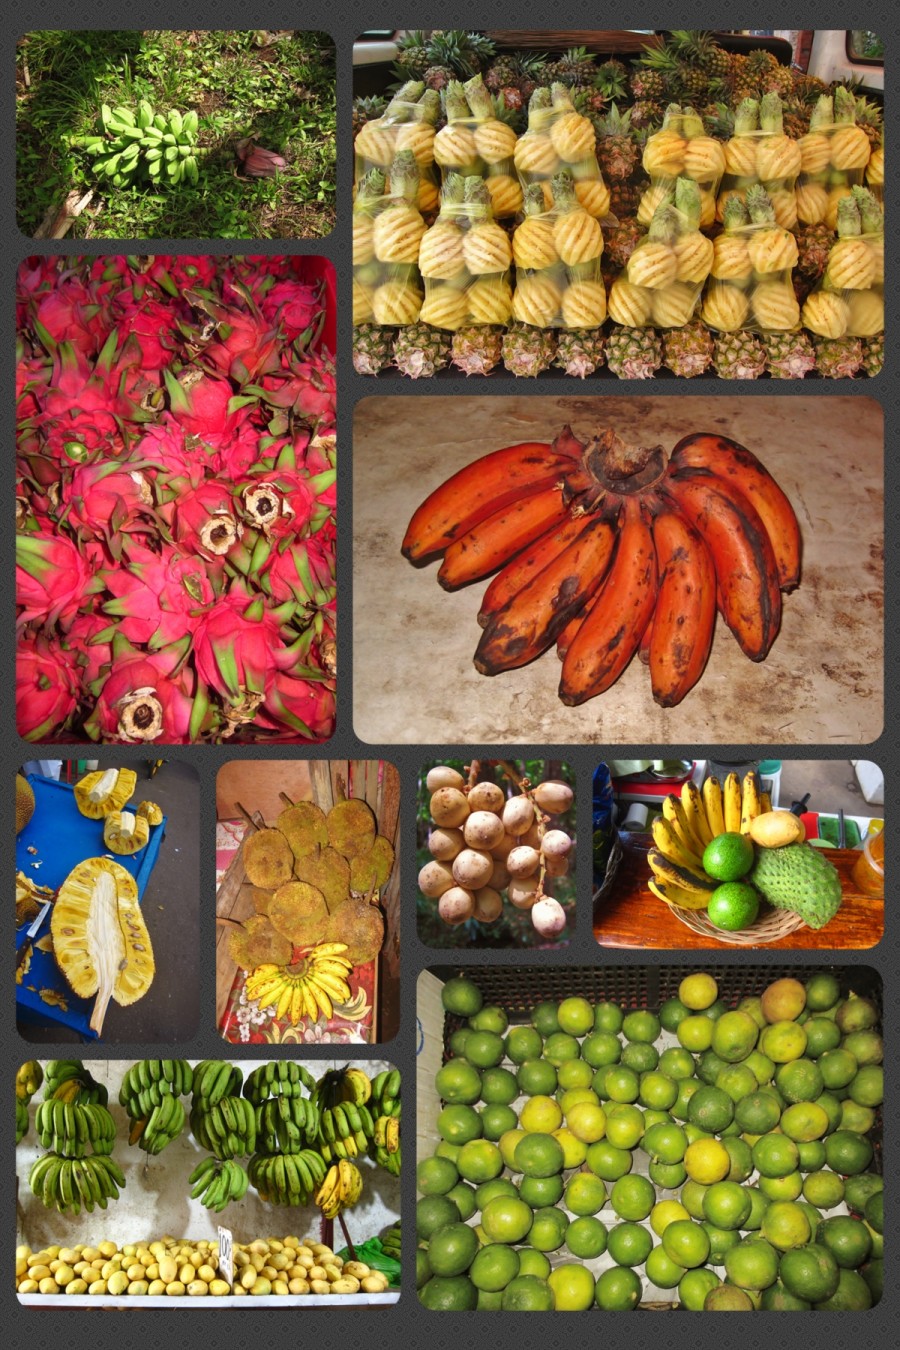 Review of tropical fruits of Asia, although some of them also from South America; such as dragon fruit and guyabano. Calamansi are in the bottom right corner. Please pay attention to the red bananas, because I've never seen this variety in Europe.